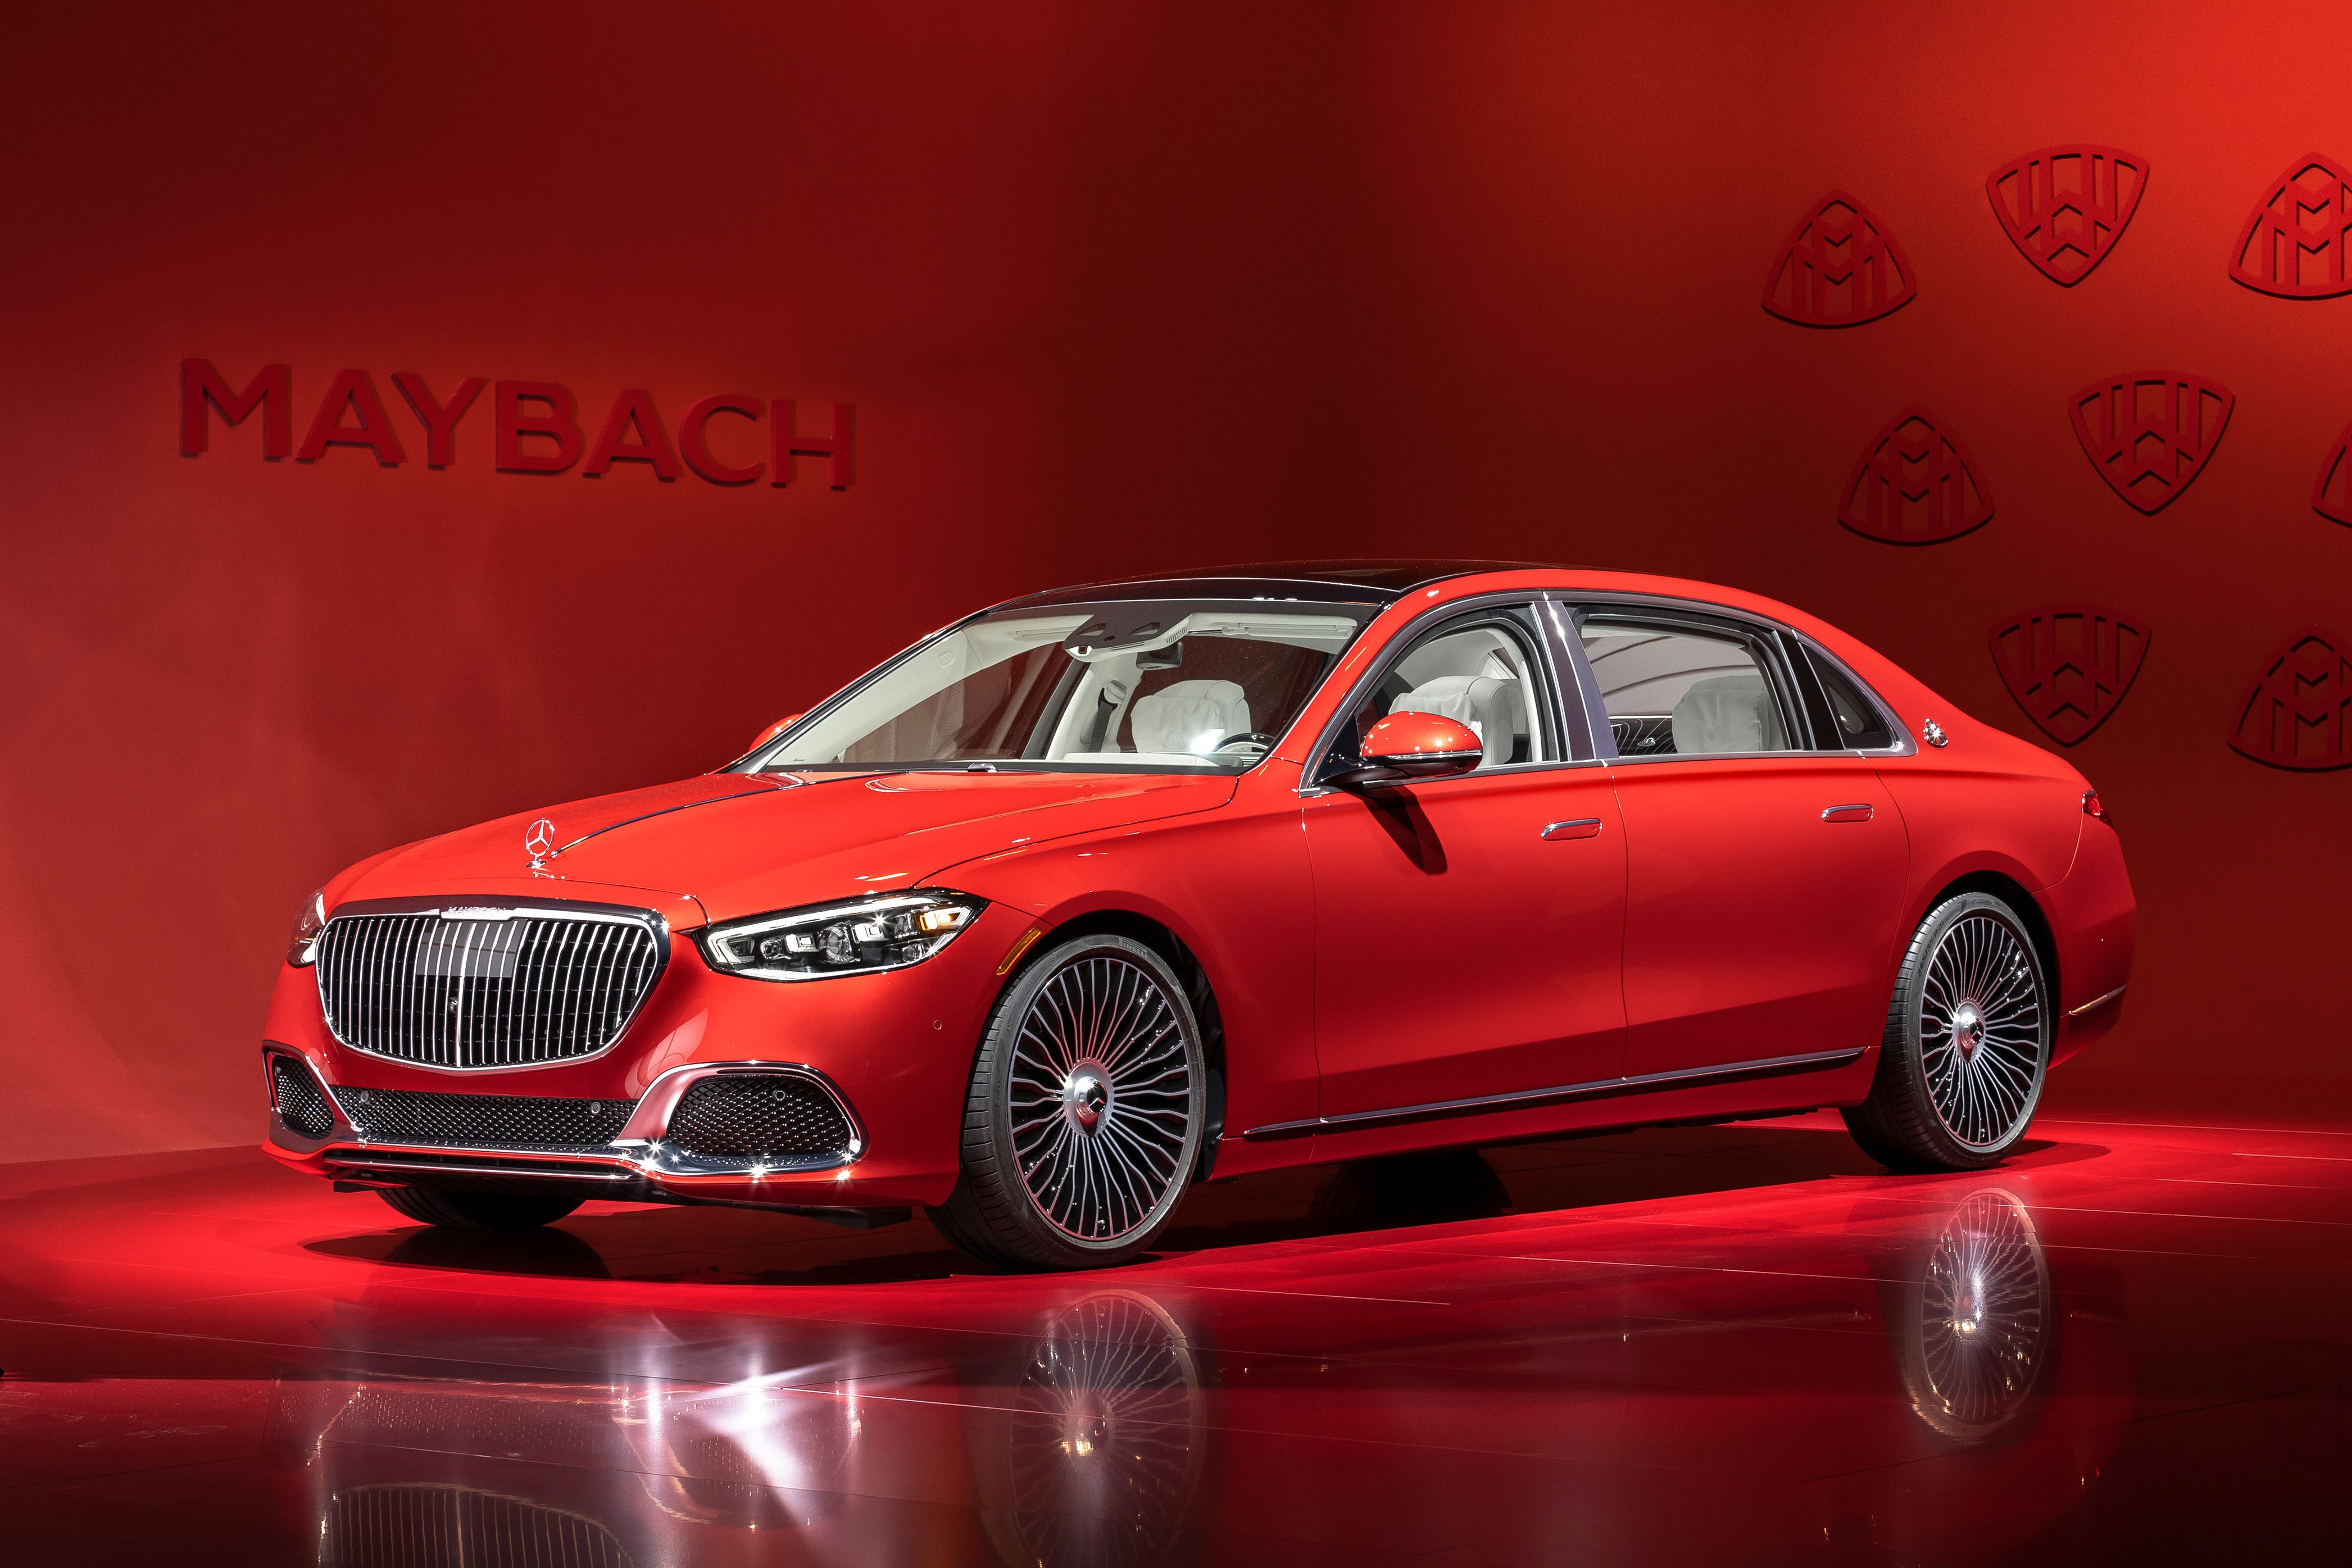 2021 Mercedes-Maybach S580 Luxury Liner Has It All, and Then Some